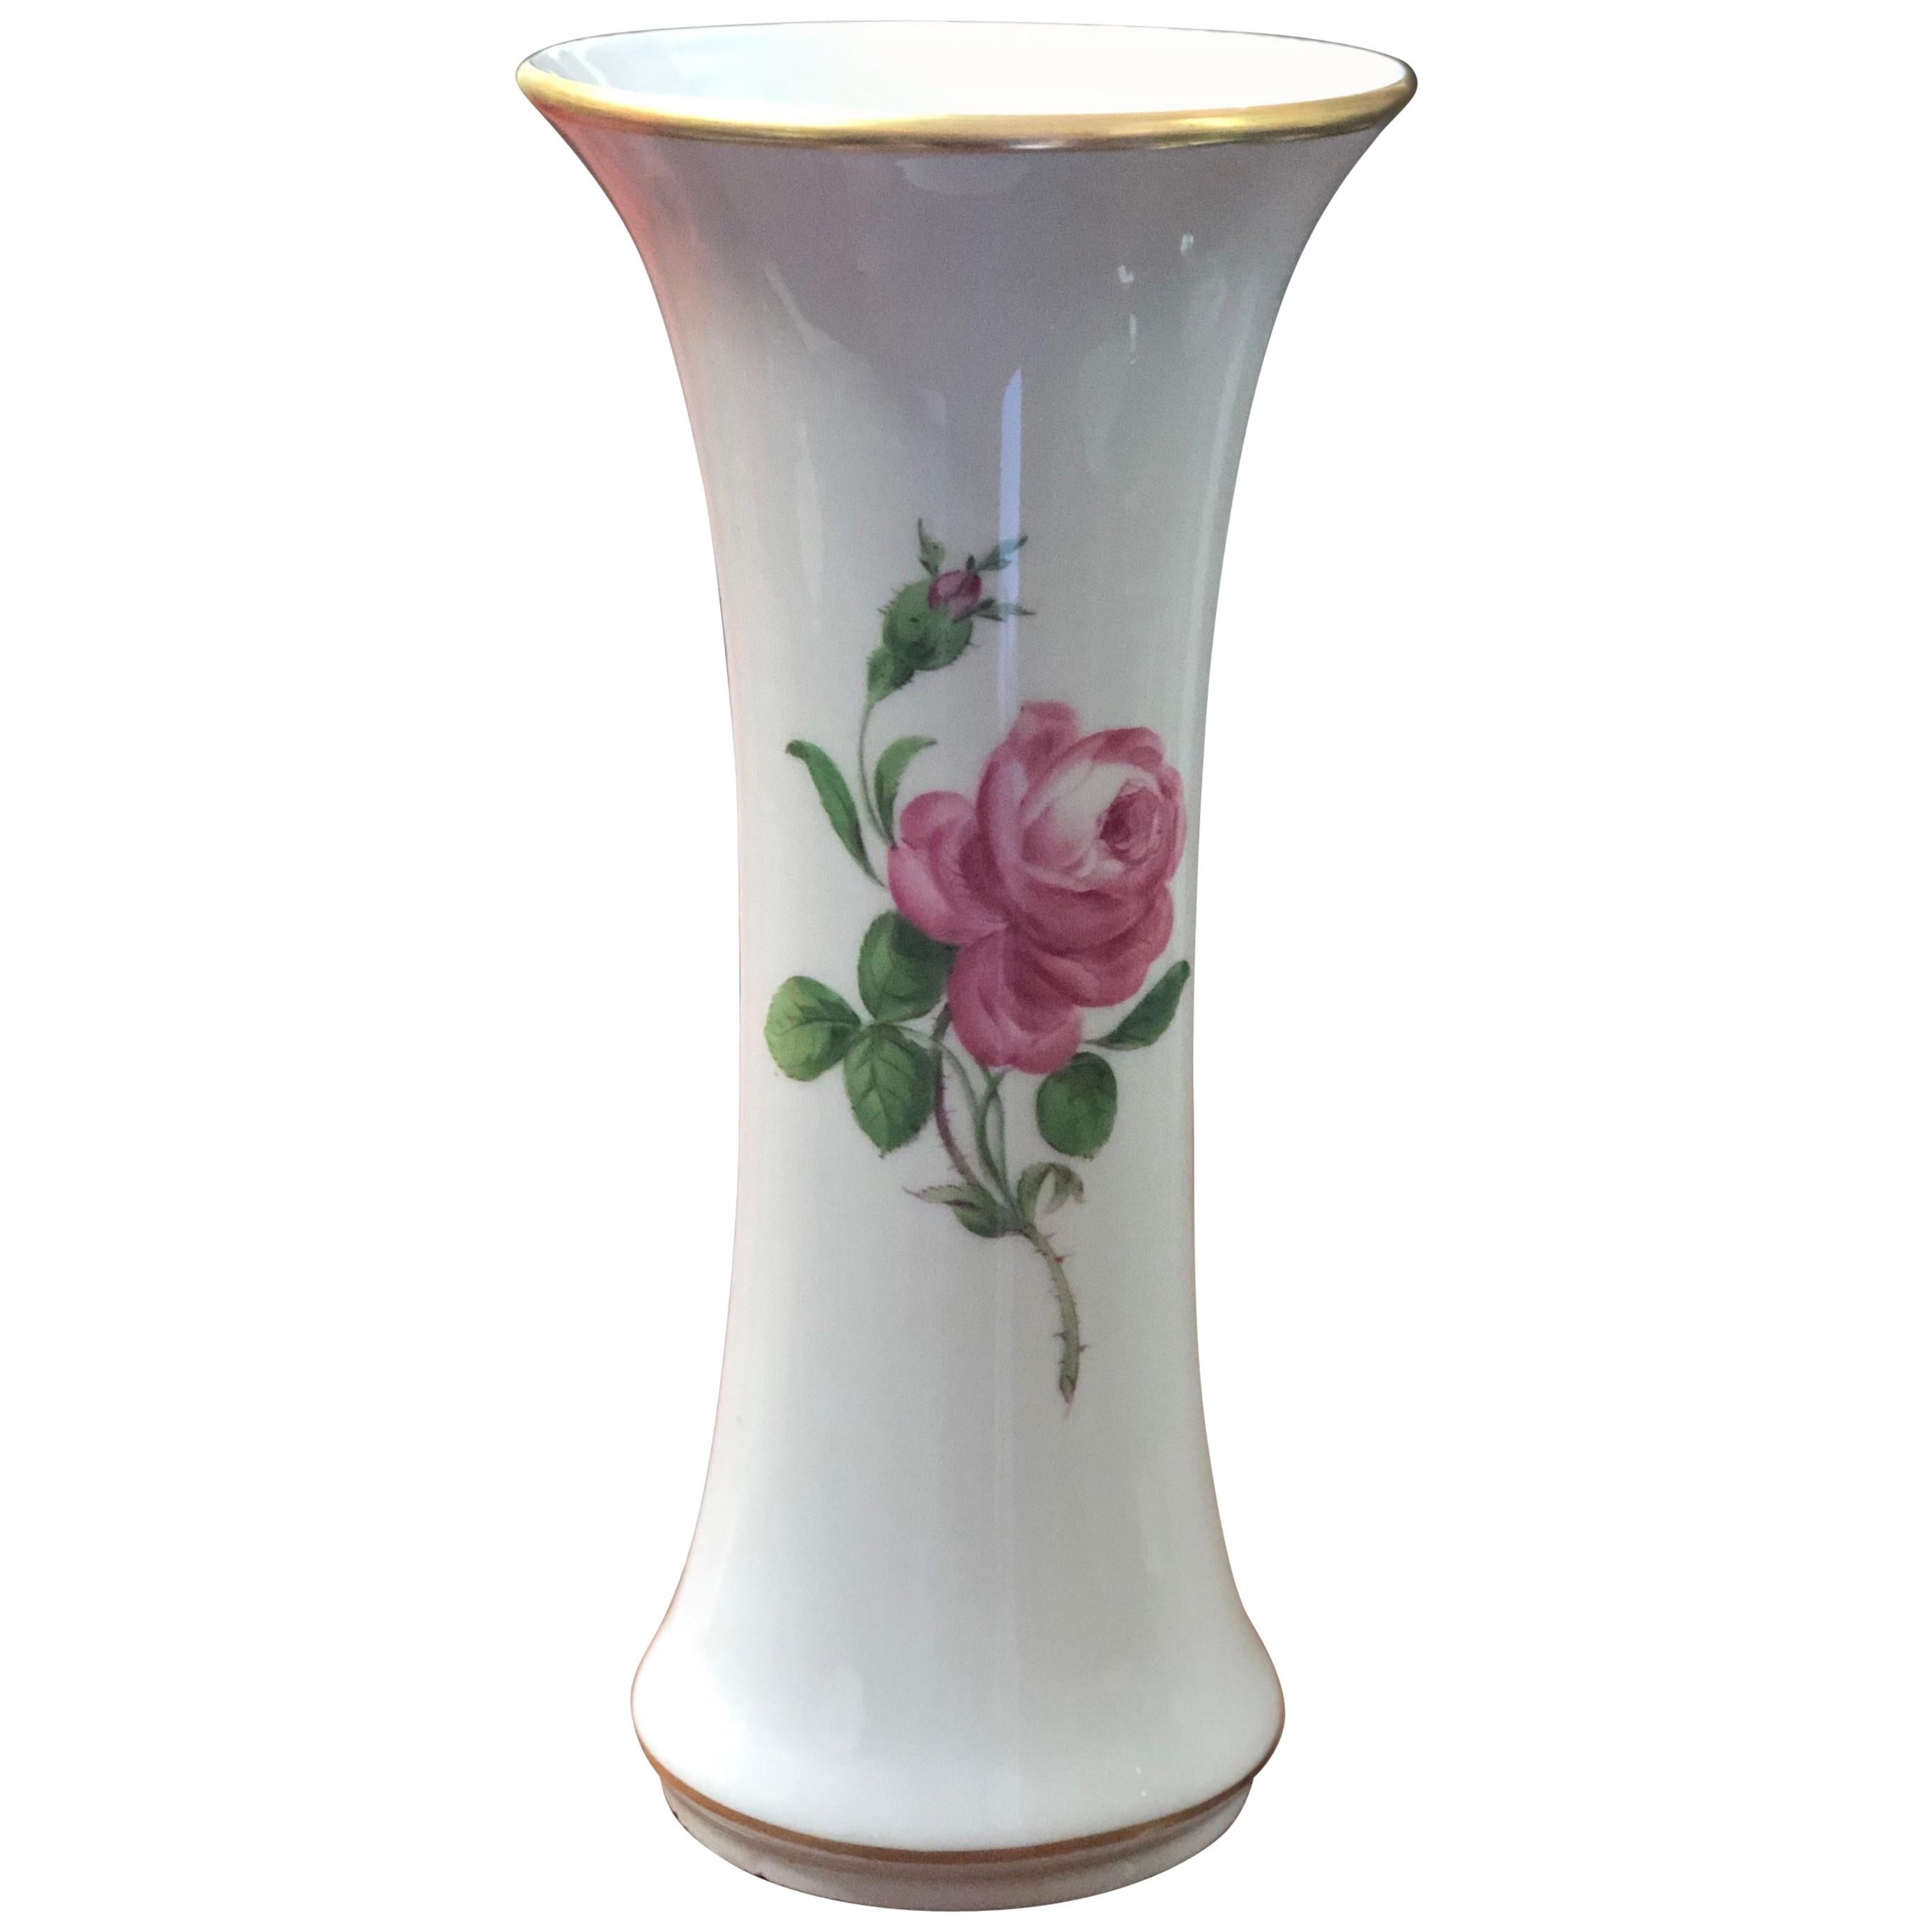 Early 20th Century Vase in White Porcelain by Meissen with Rose Decoration